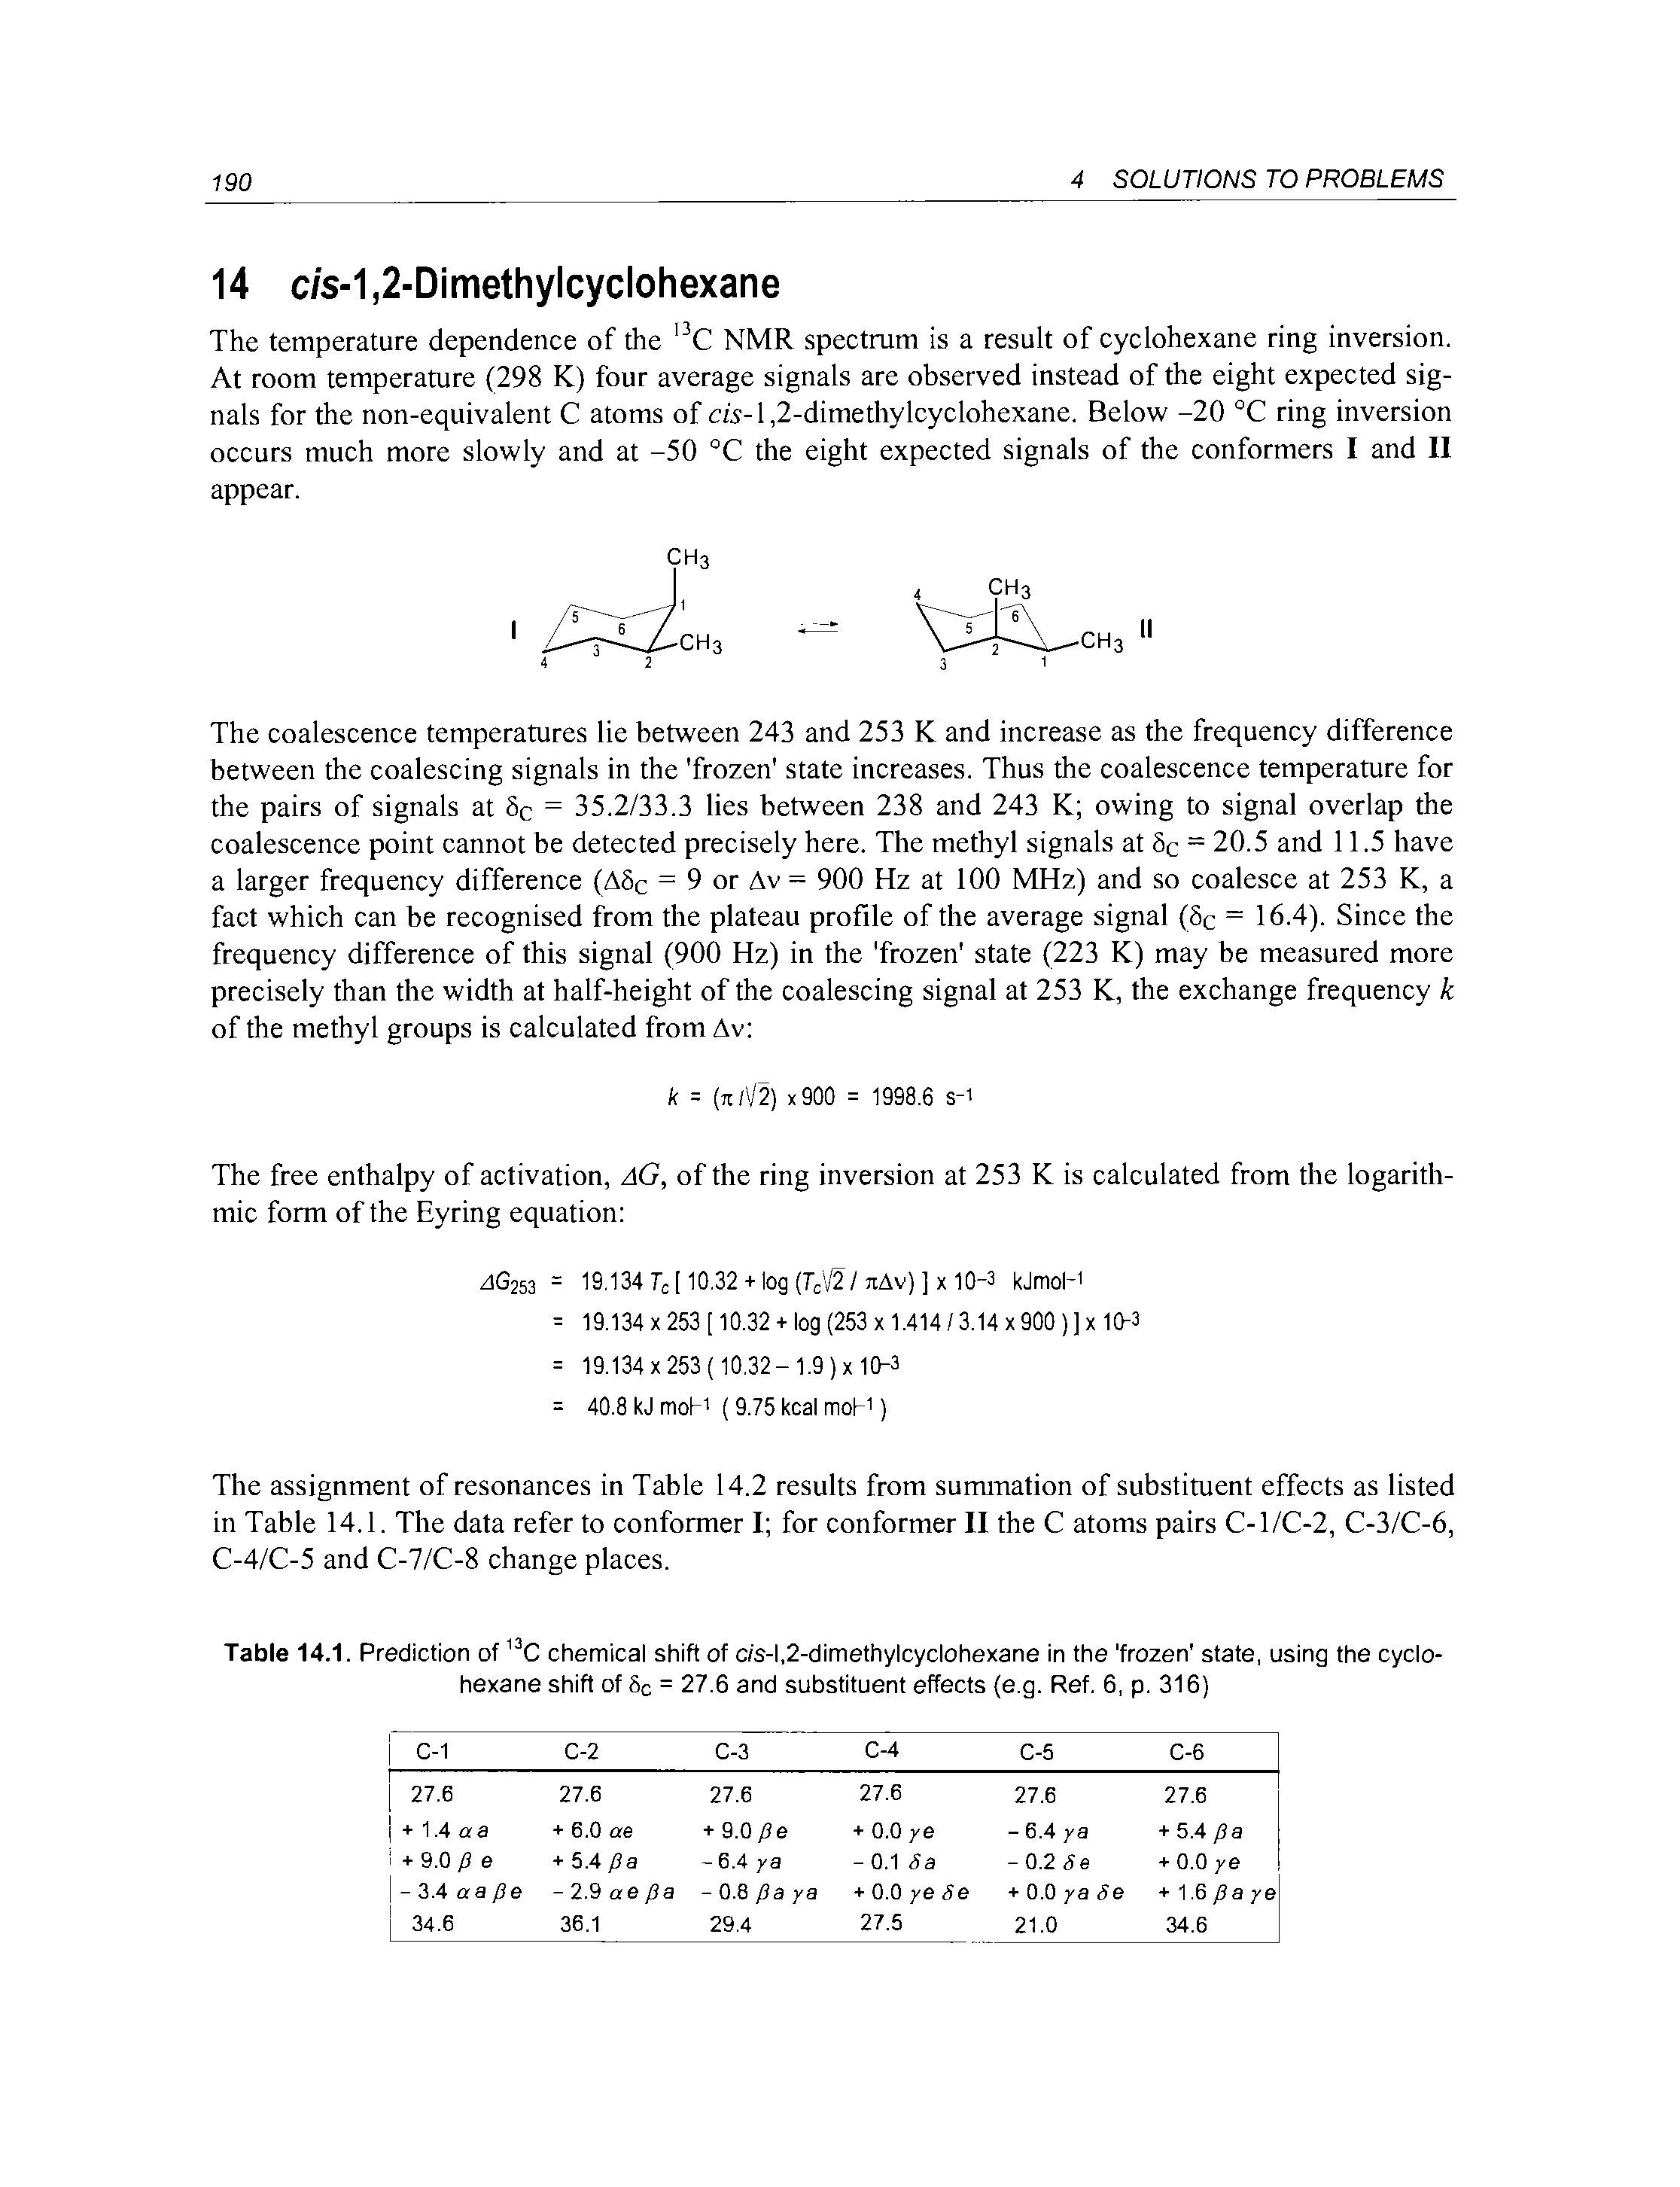 Table 14.1. Prediction of C chemical shift of c/s-l,2-dimethylcyclohexane in the frozen state, using the cyclohexane shift of 8c = 27.6 and substituent effects (e.g. Ref. 6, p. 316)...